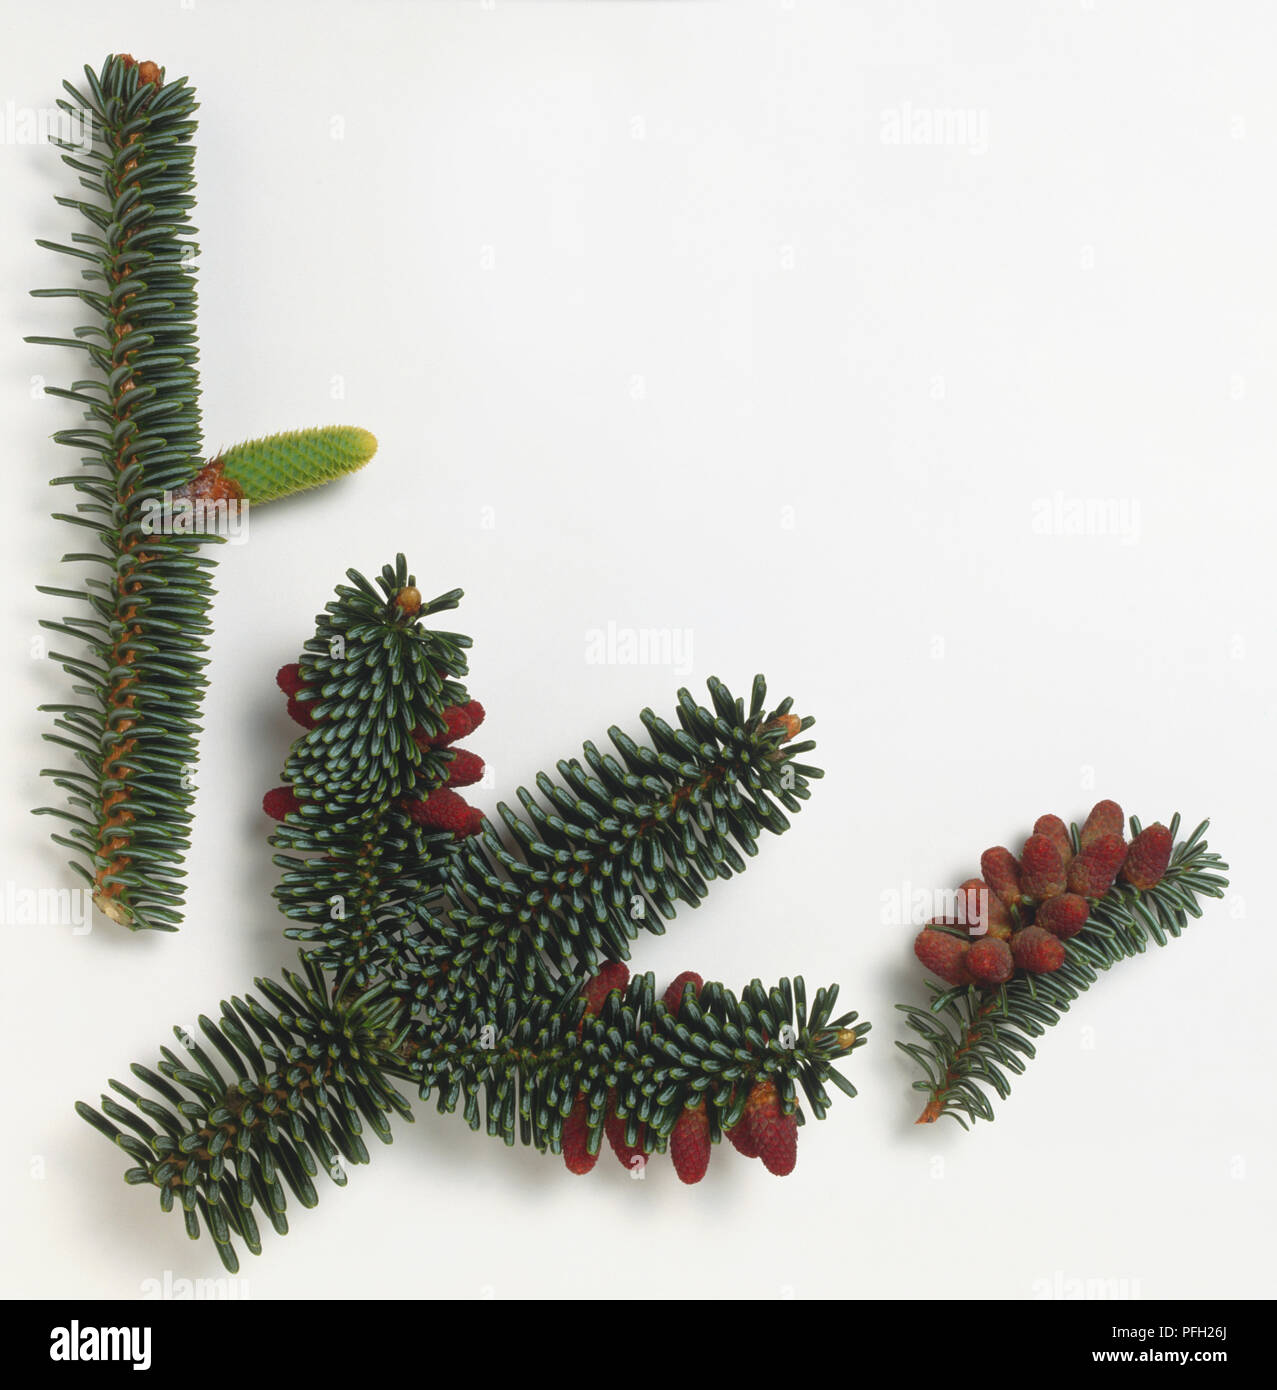 Pinaceae, Abies numidica, Algerian Fir, rigid linear leaves densely arranged around shoot, red-tinged male flowers, upright green female flower clusters. Stock Photo